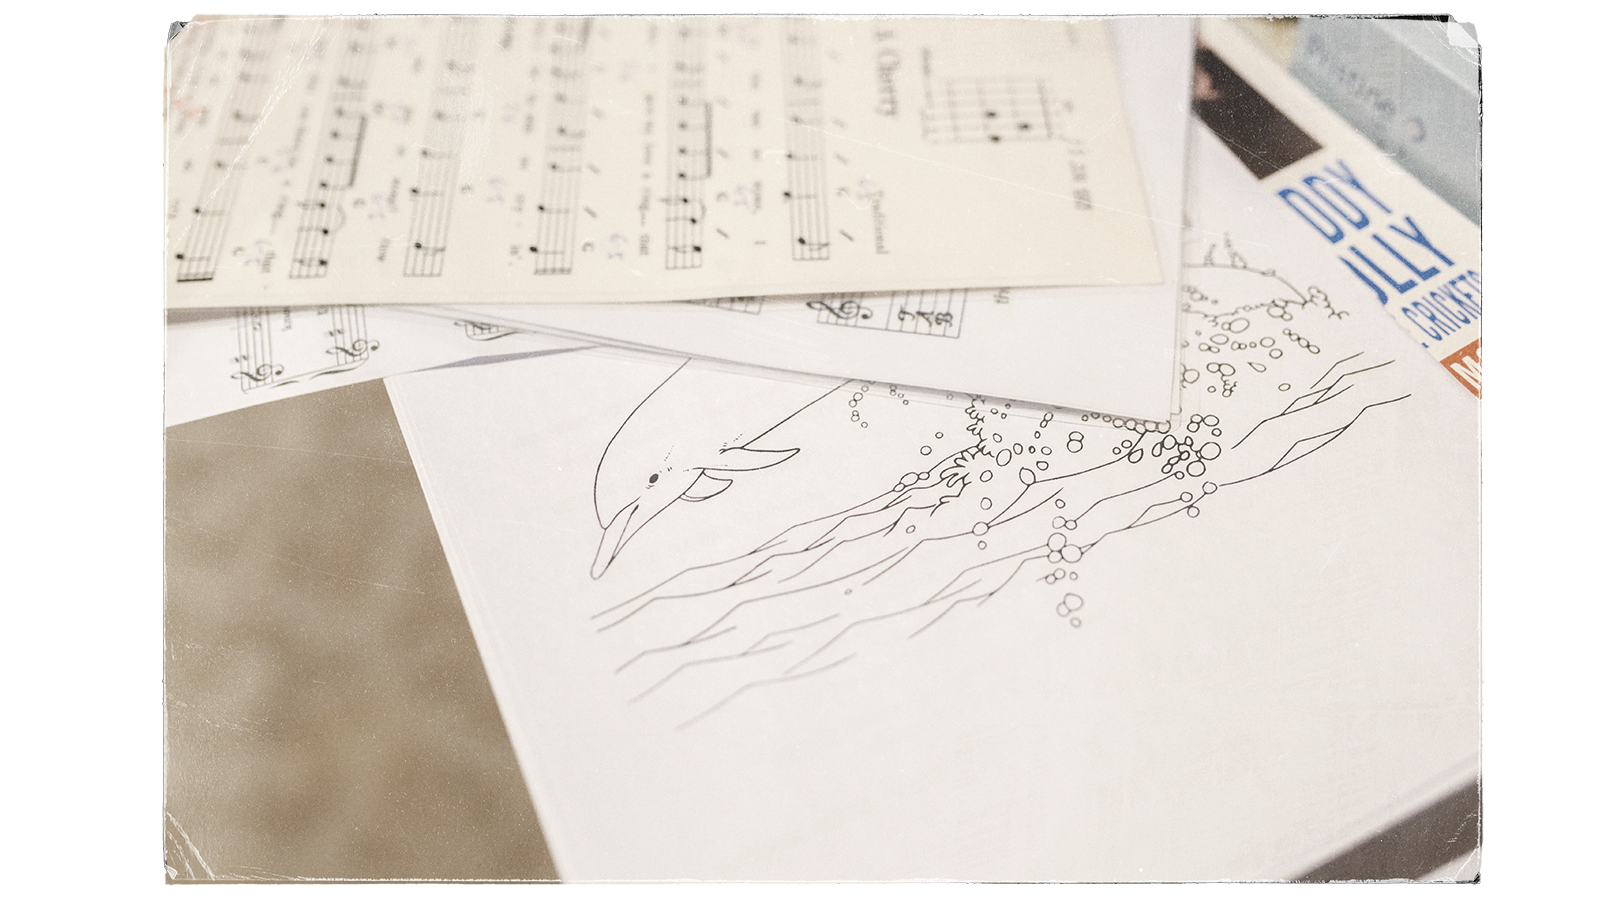 Sheets of music and a peice of paper with an illustration of a dolphin jumping out of water